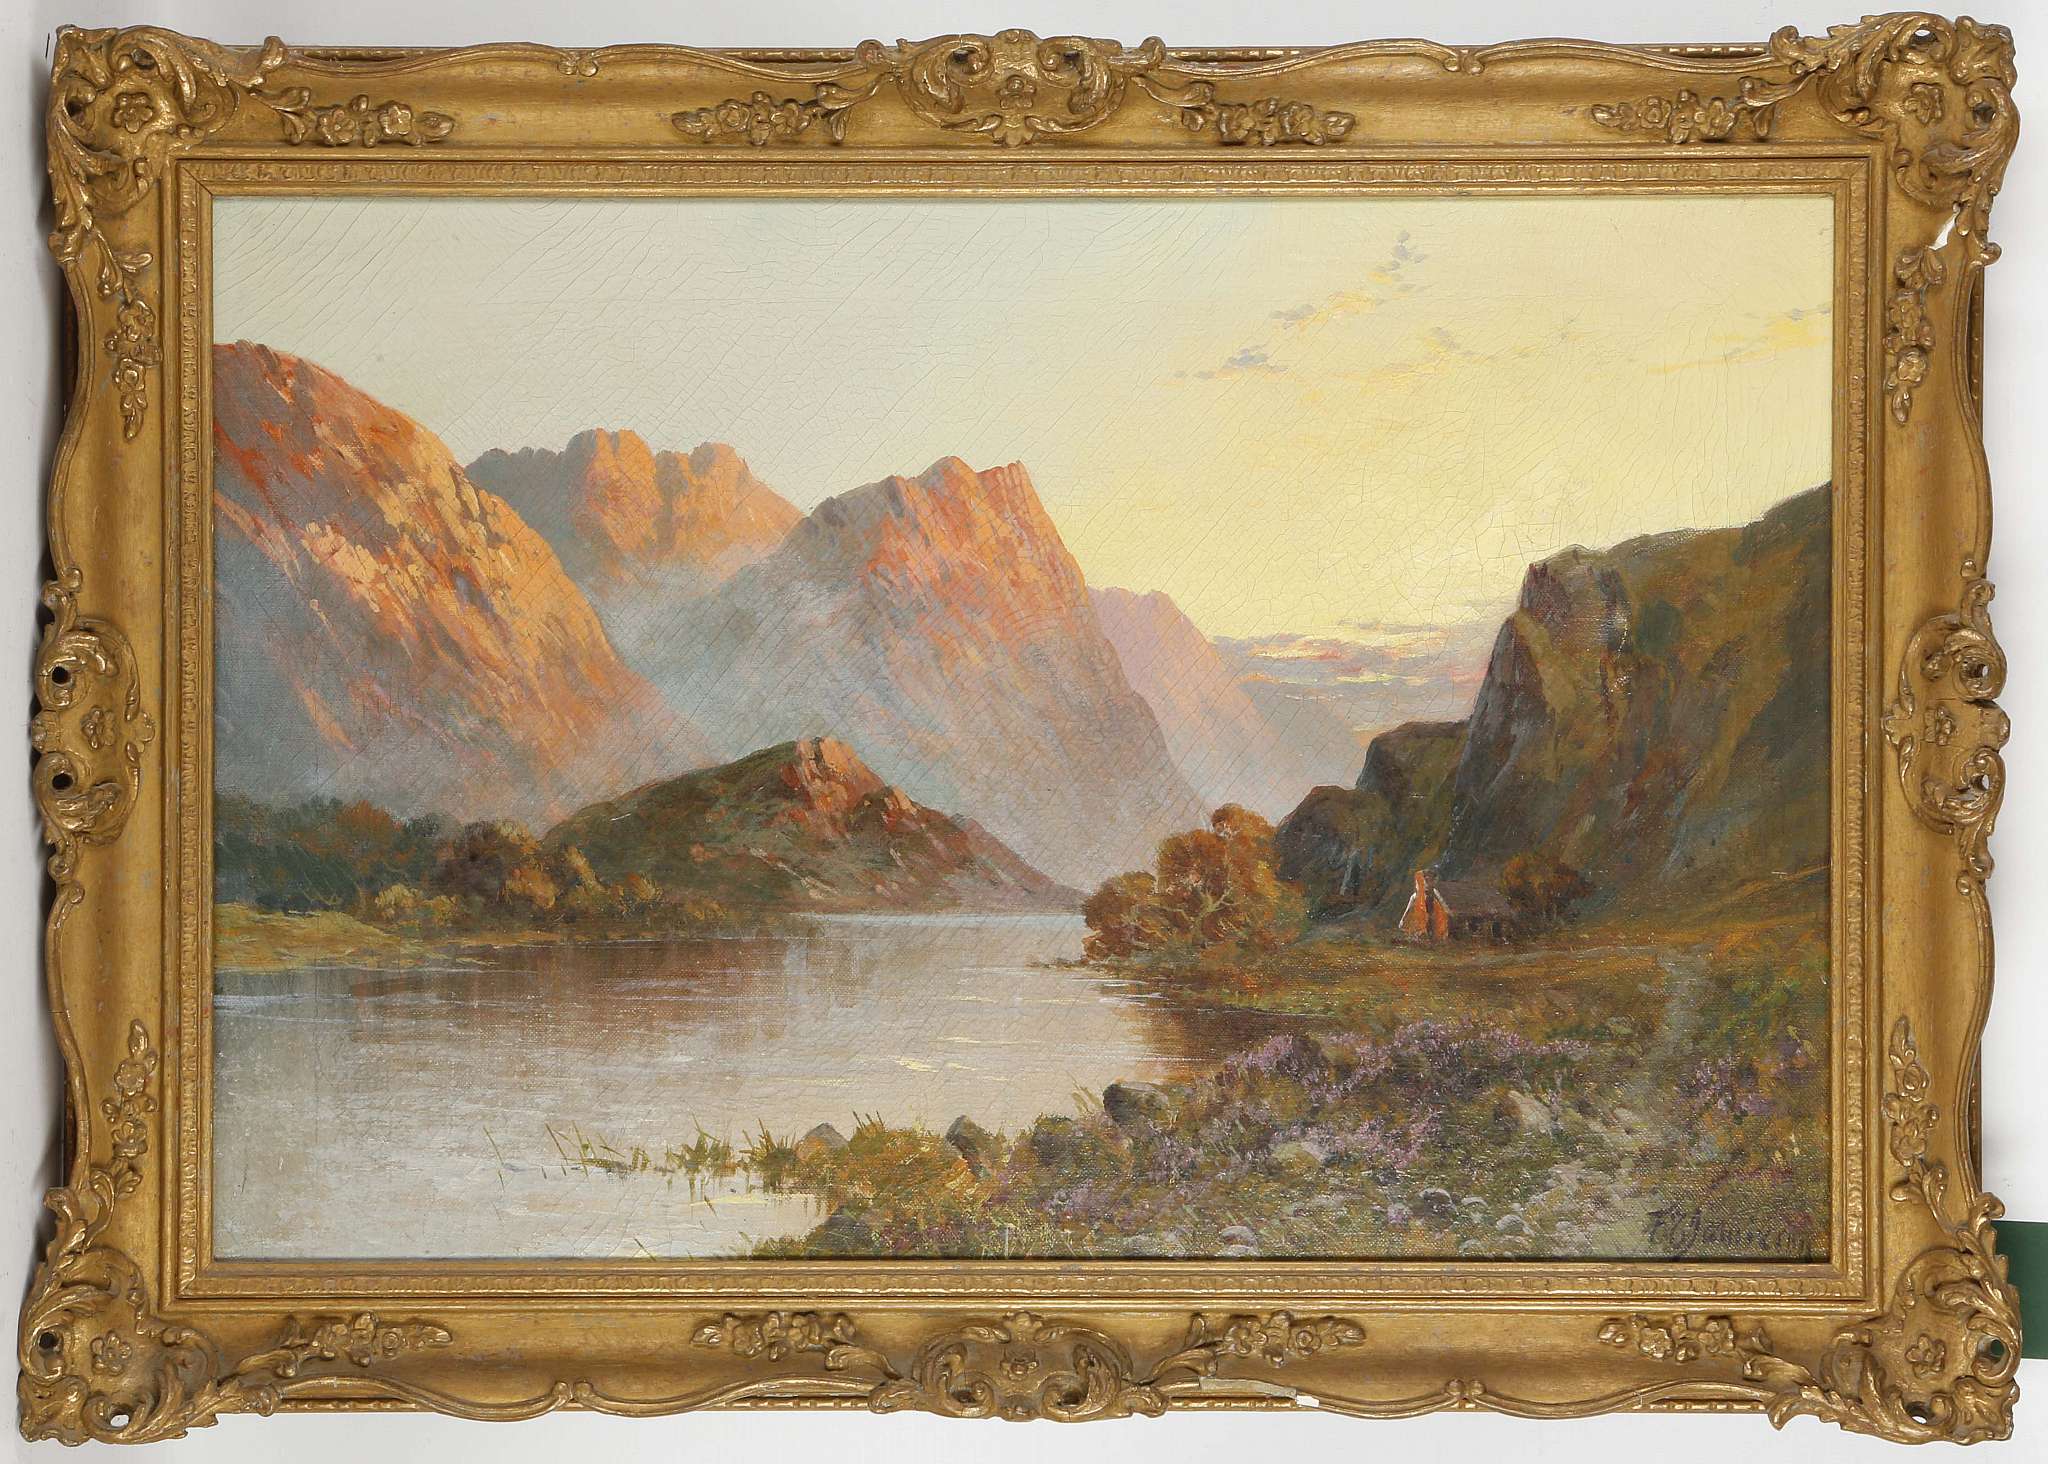 F.E. JAMIESON, 'Loch Etive', oil on canvas, sunset over Scottish mountains. Signed lower right, in a